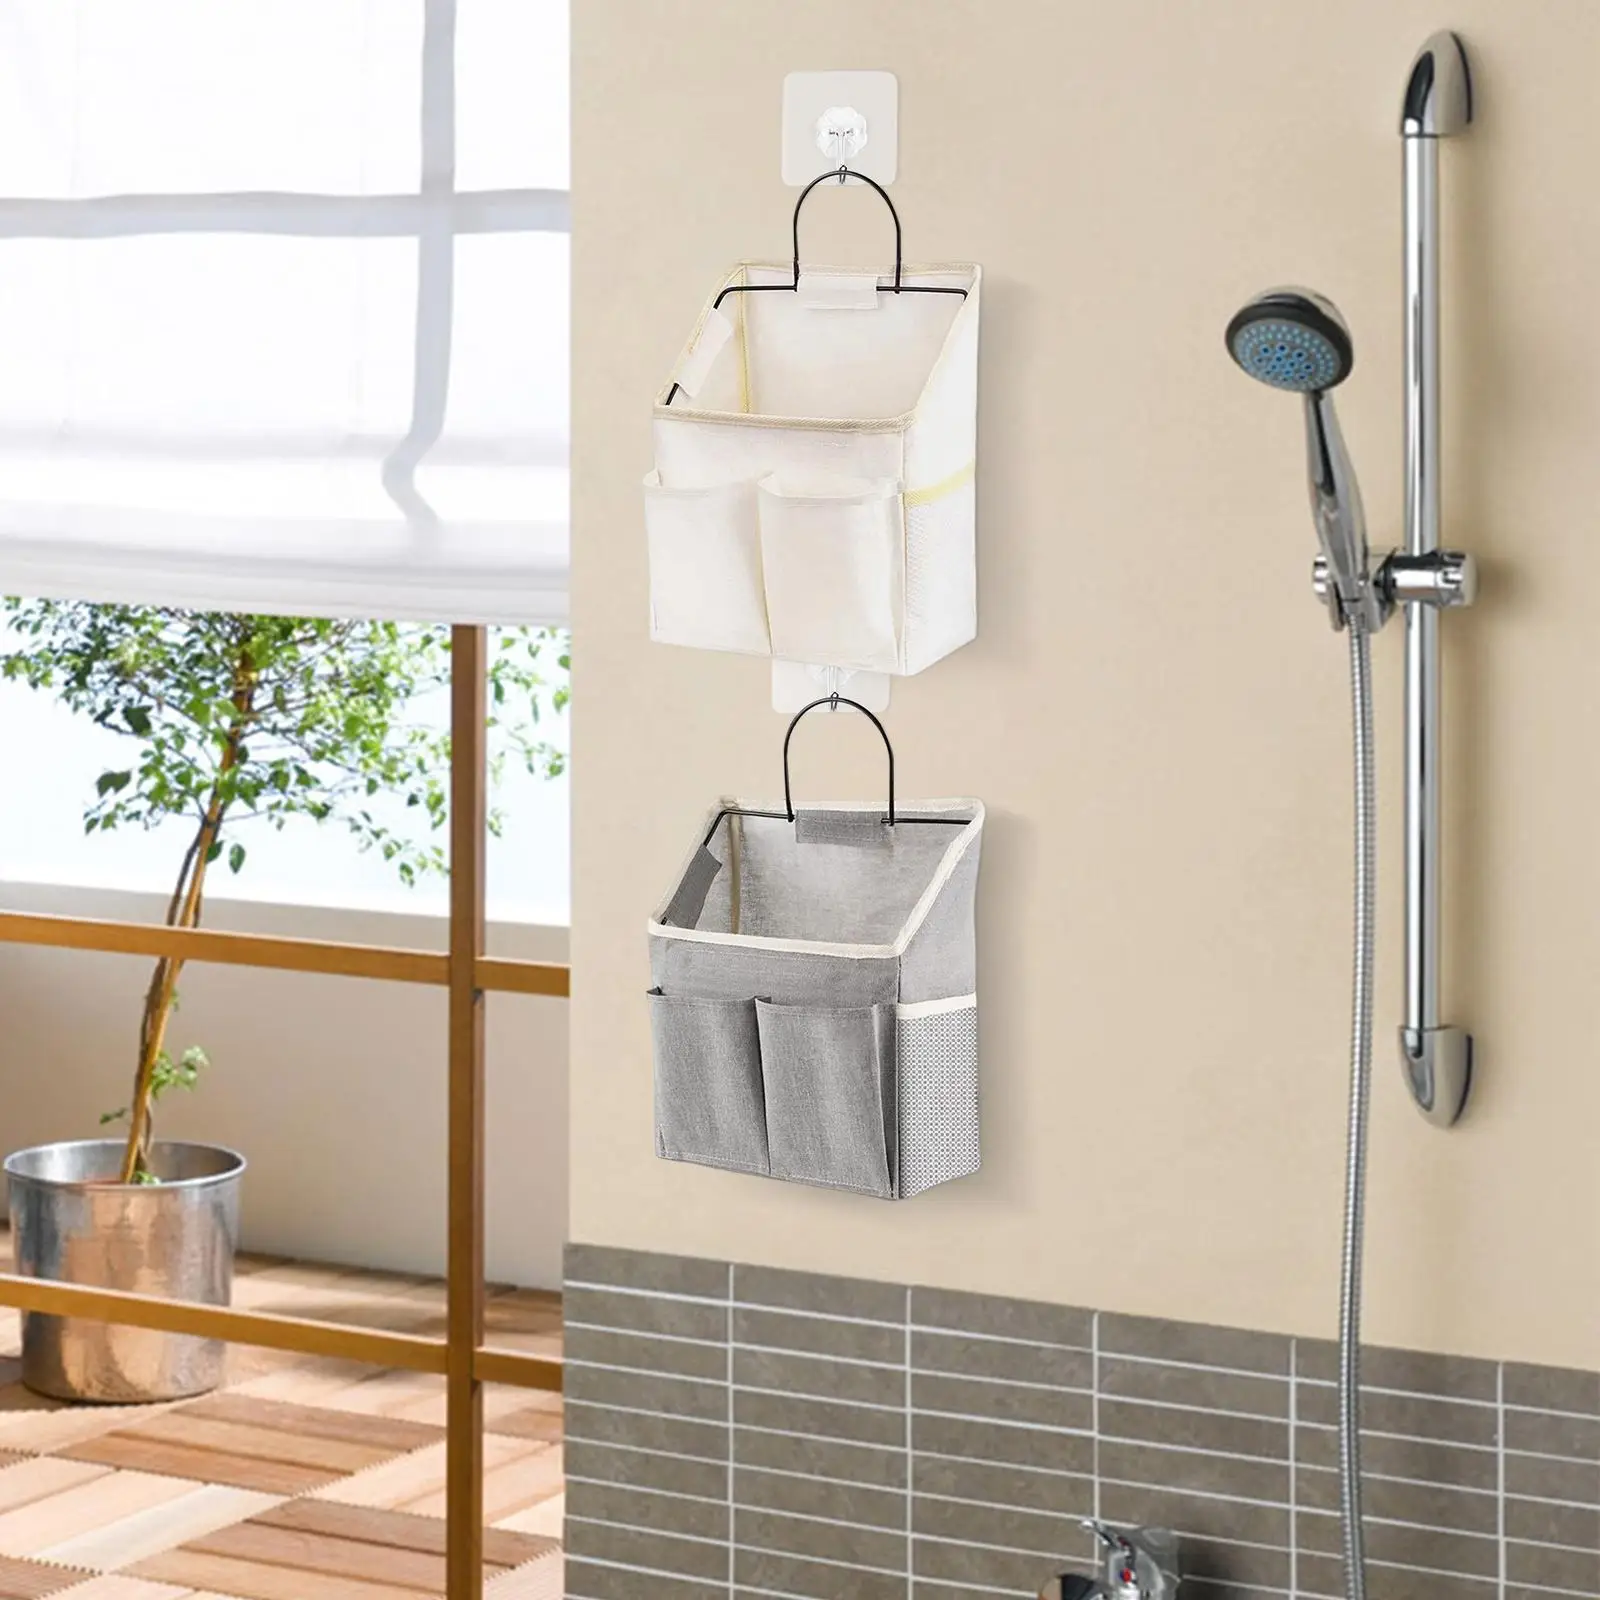 Waterproof Wall Closet Hanging Storage Organizer for Bathroom with Metal Hook ,High Capacity Minimalist Style Sturdy Durable